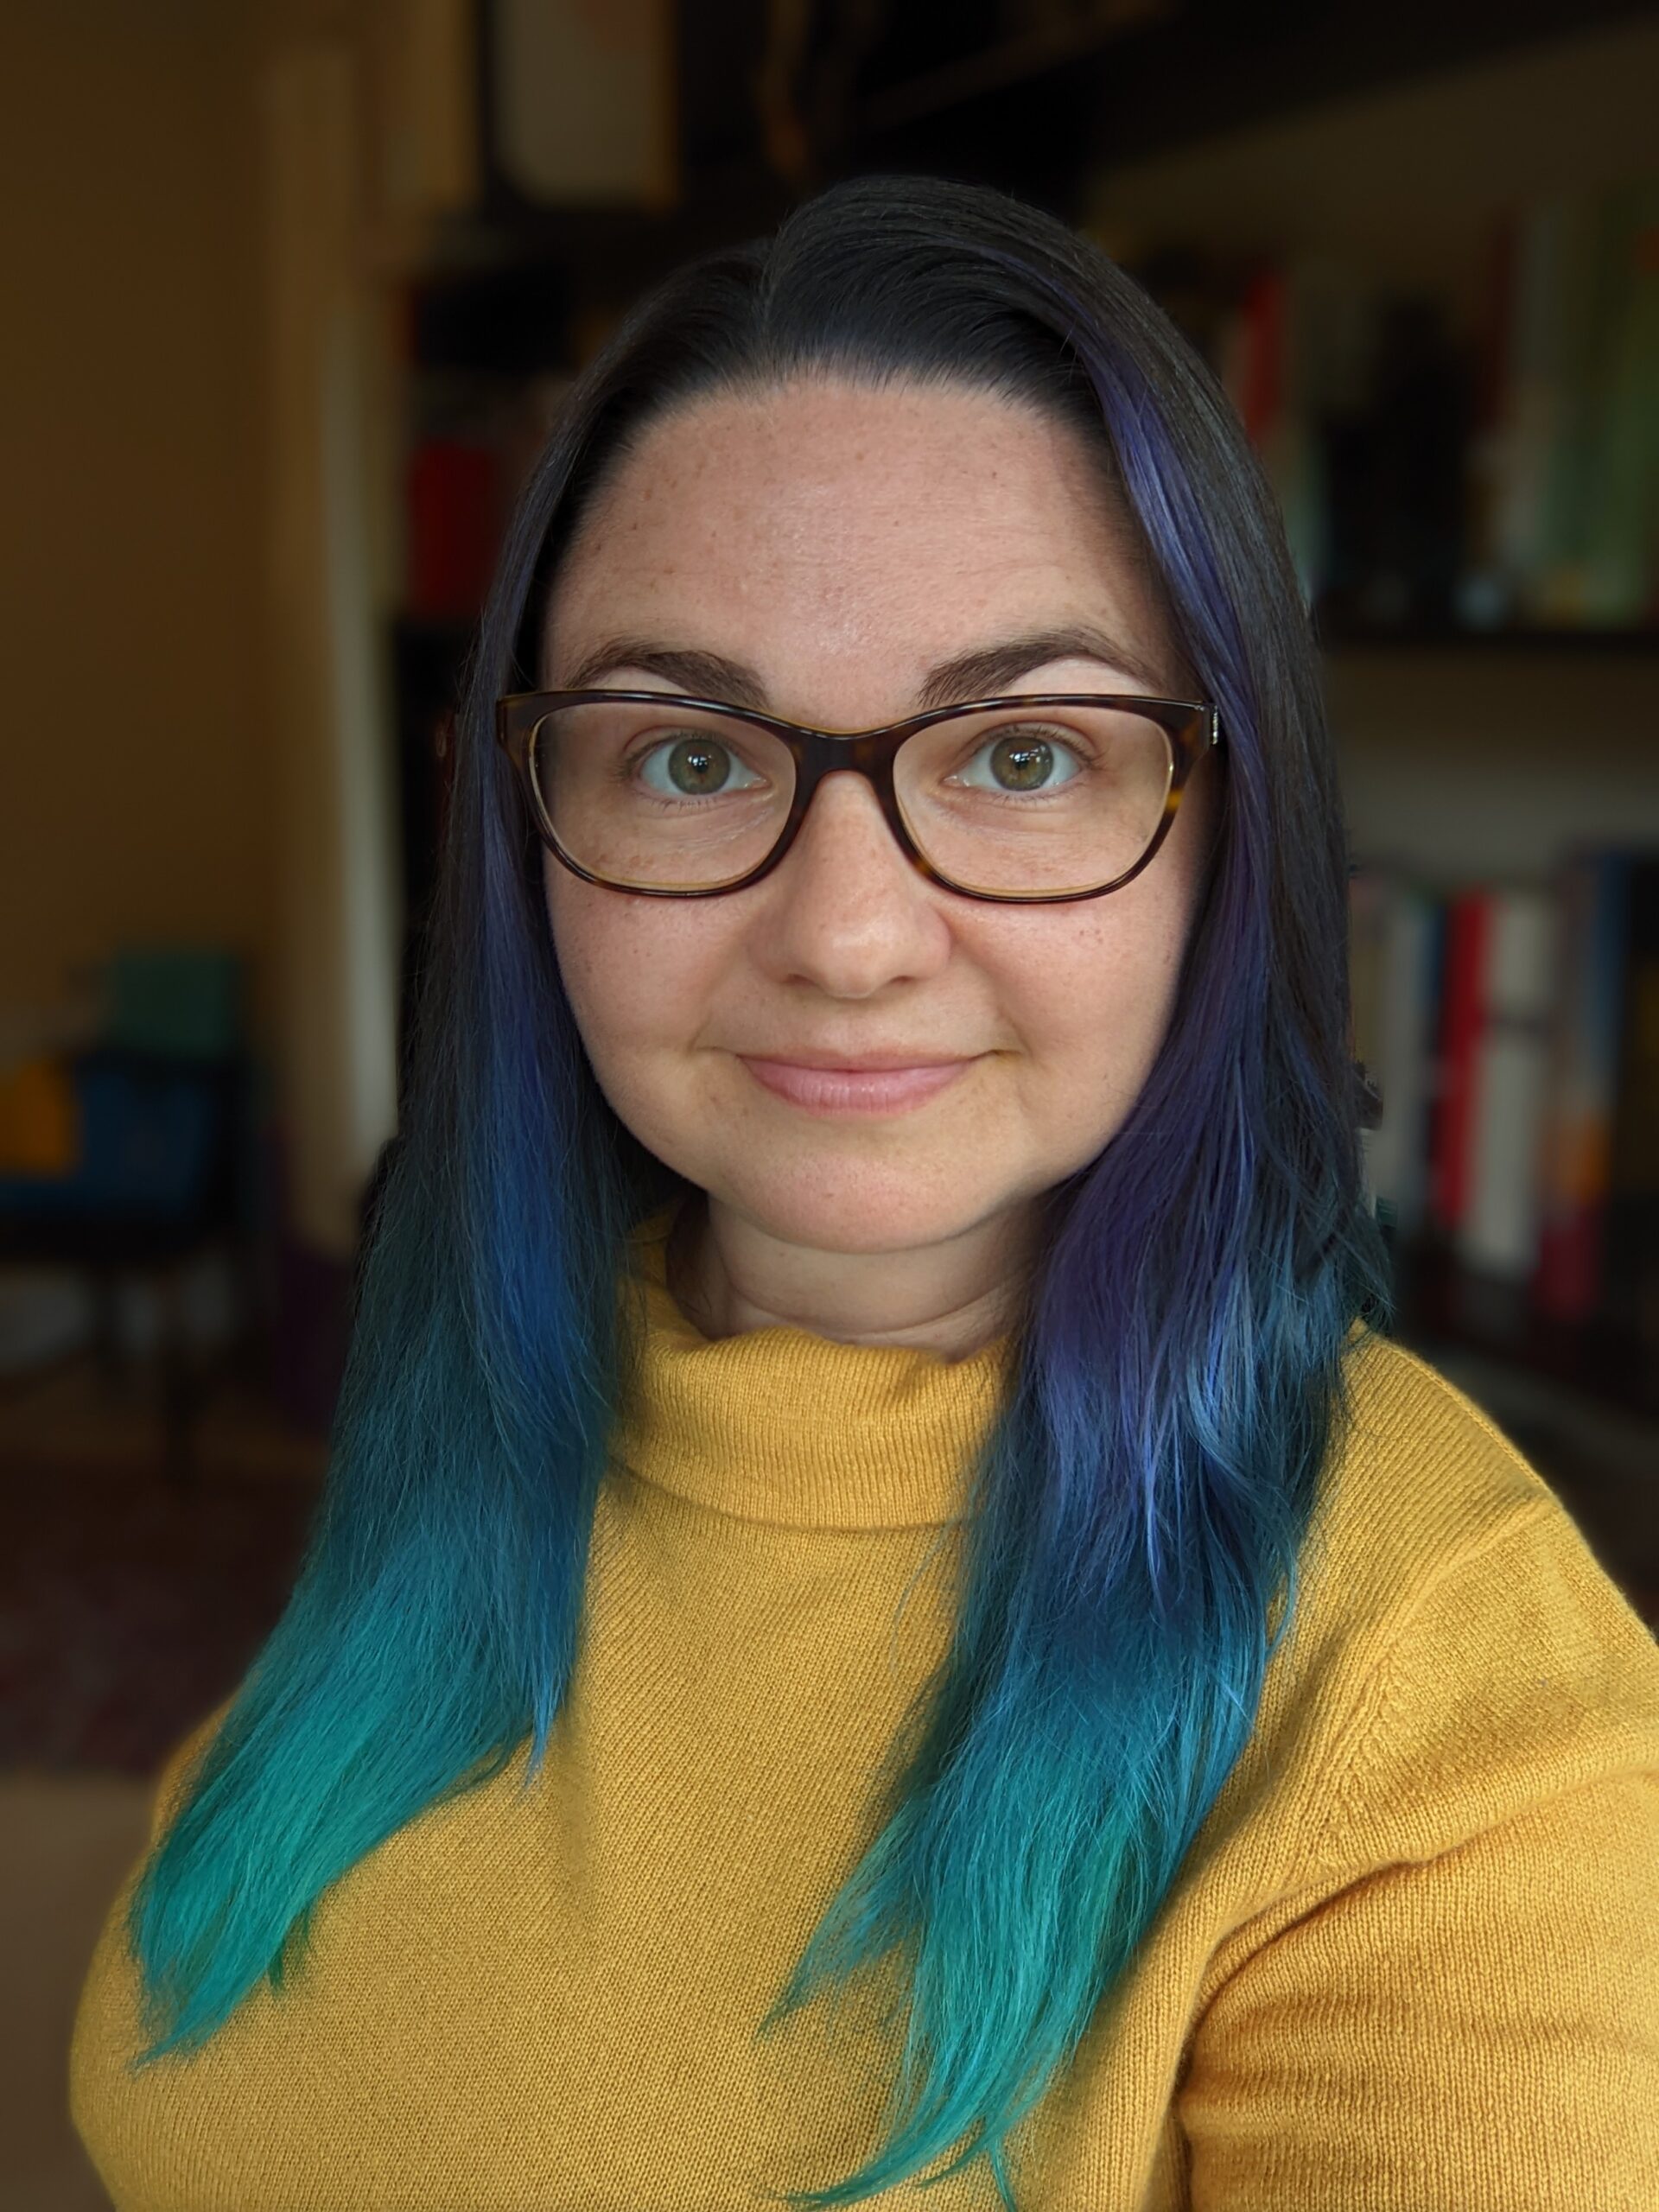 a smiling caucasian woman with dark blue hair that fades to teal at the tips wearing a yellow turtleneck and dark frame glasses